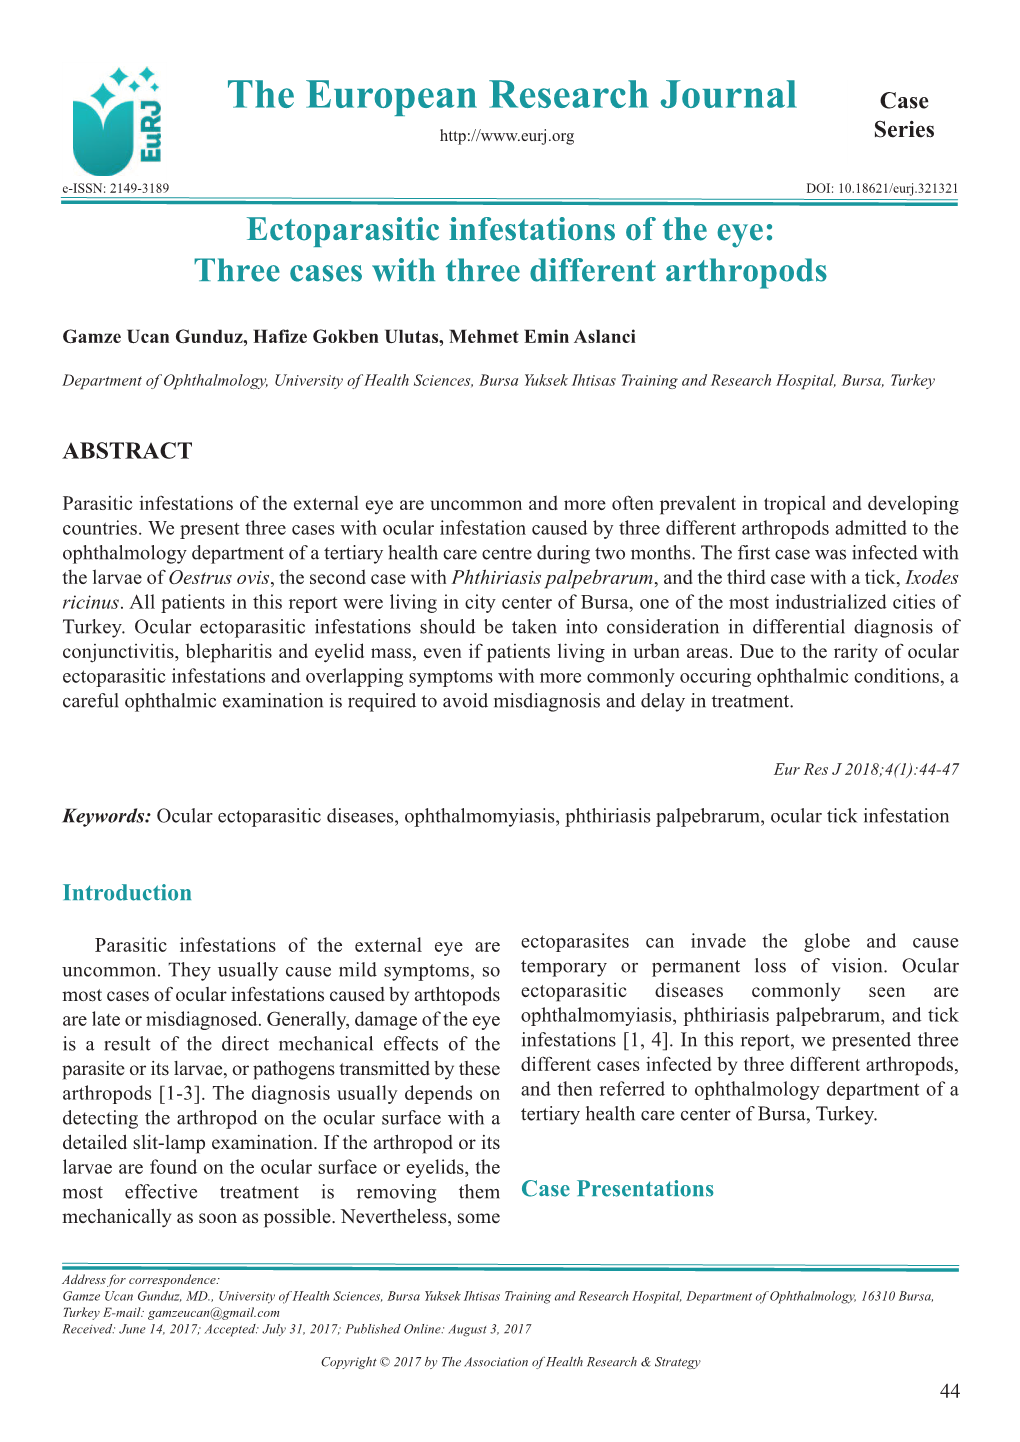 Ectoparasitic Infestations of the Eye: Three Cases with Three Different Arthropods